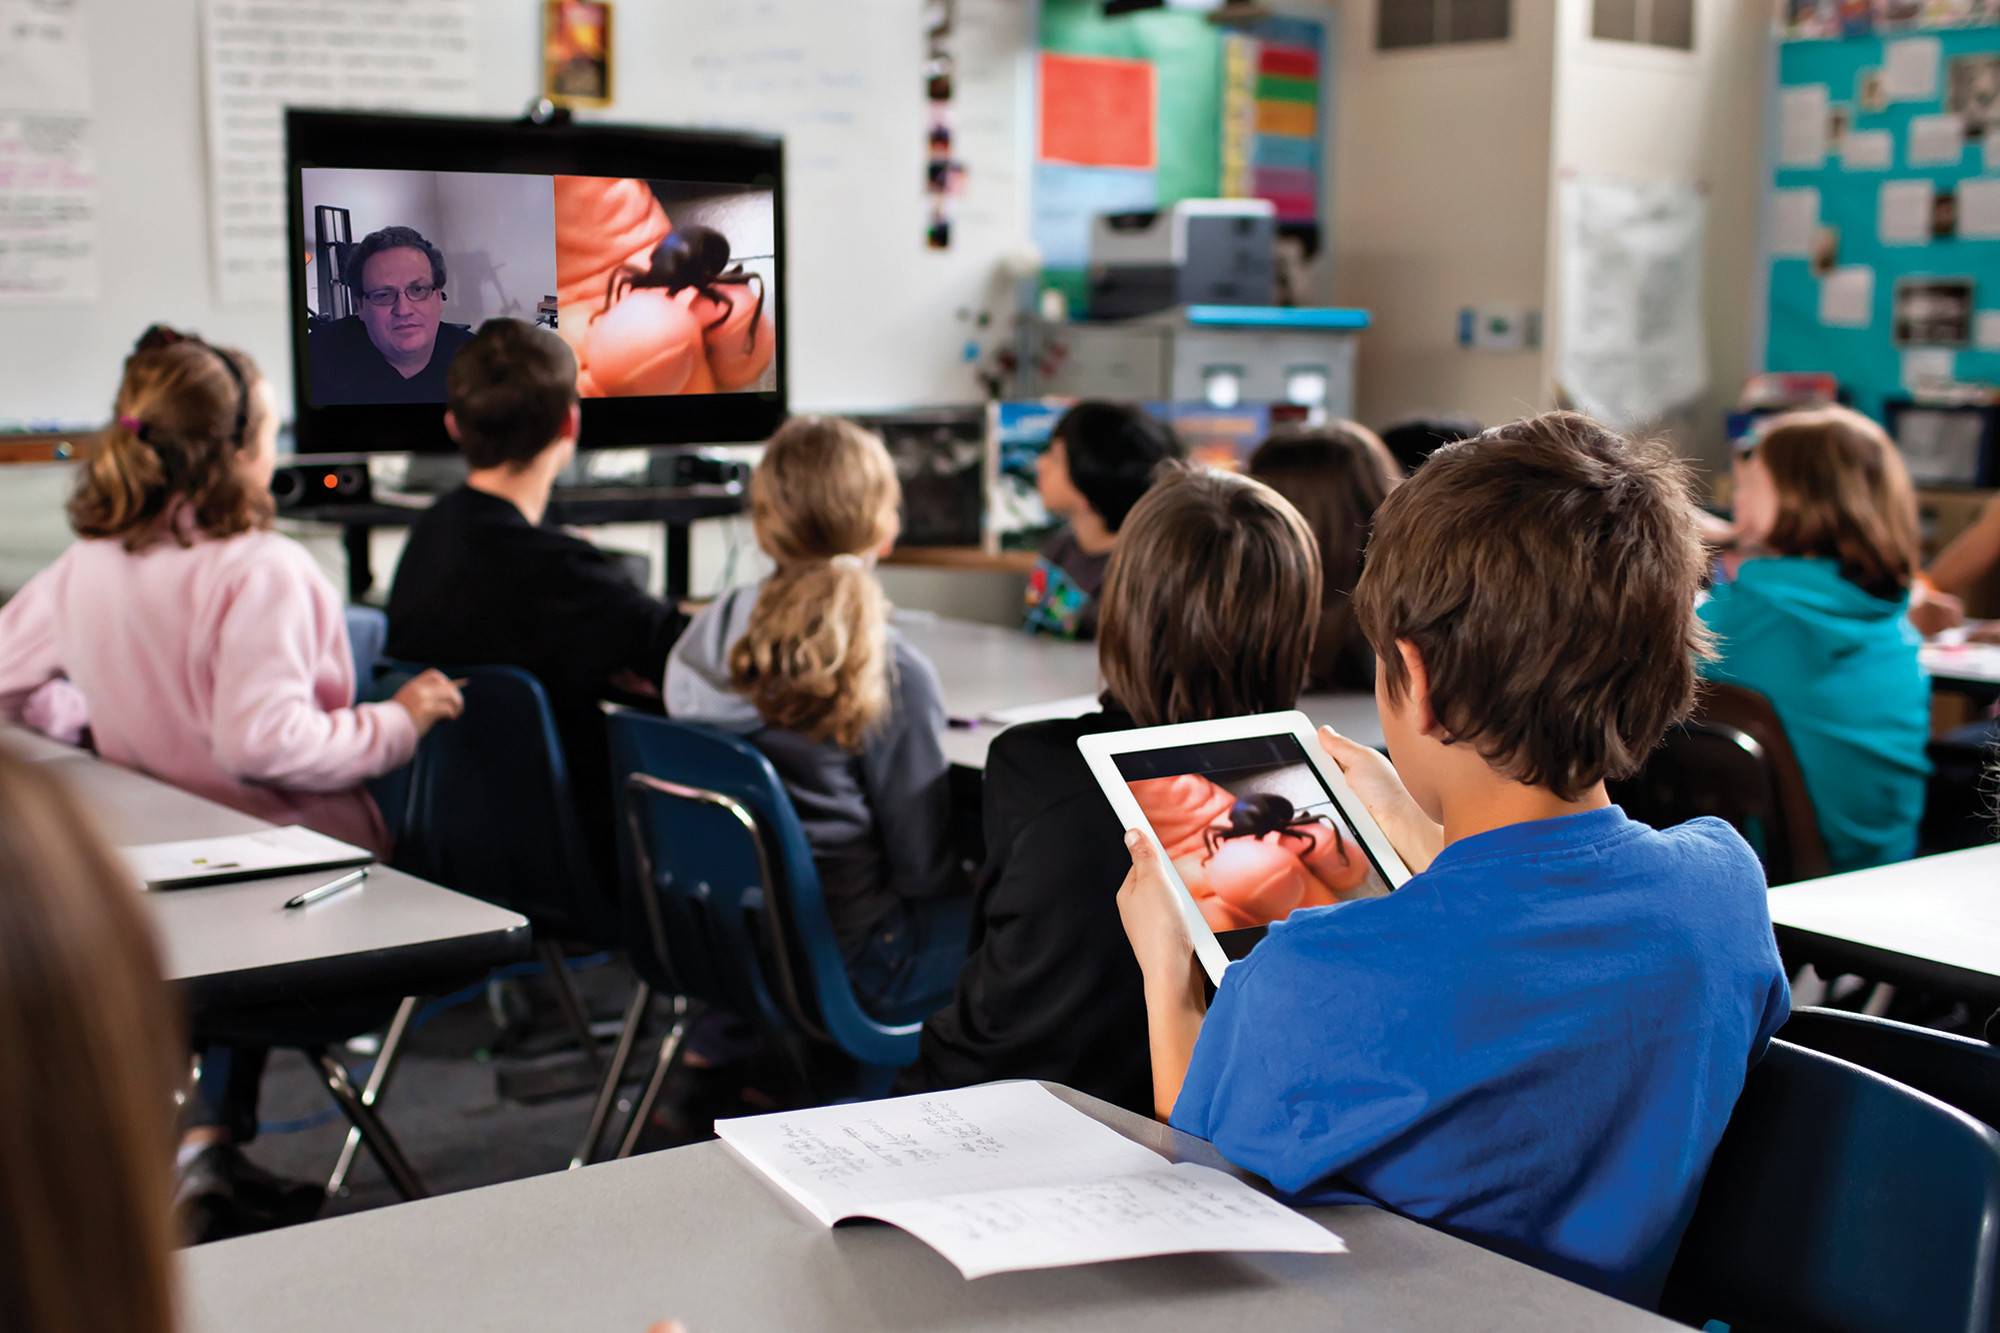 The benefits of using video conferencing in the classroom - Bring experts into the classroom